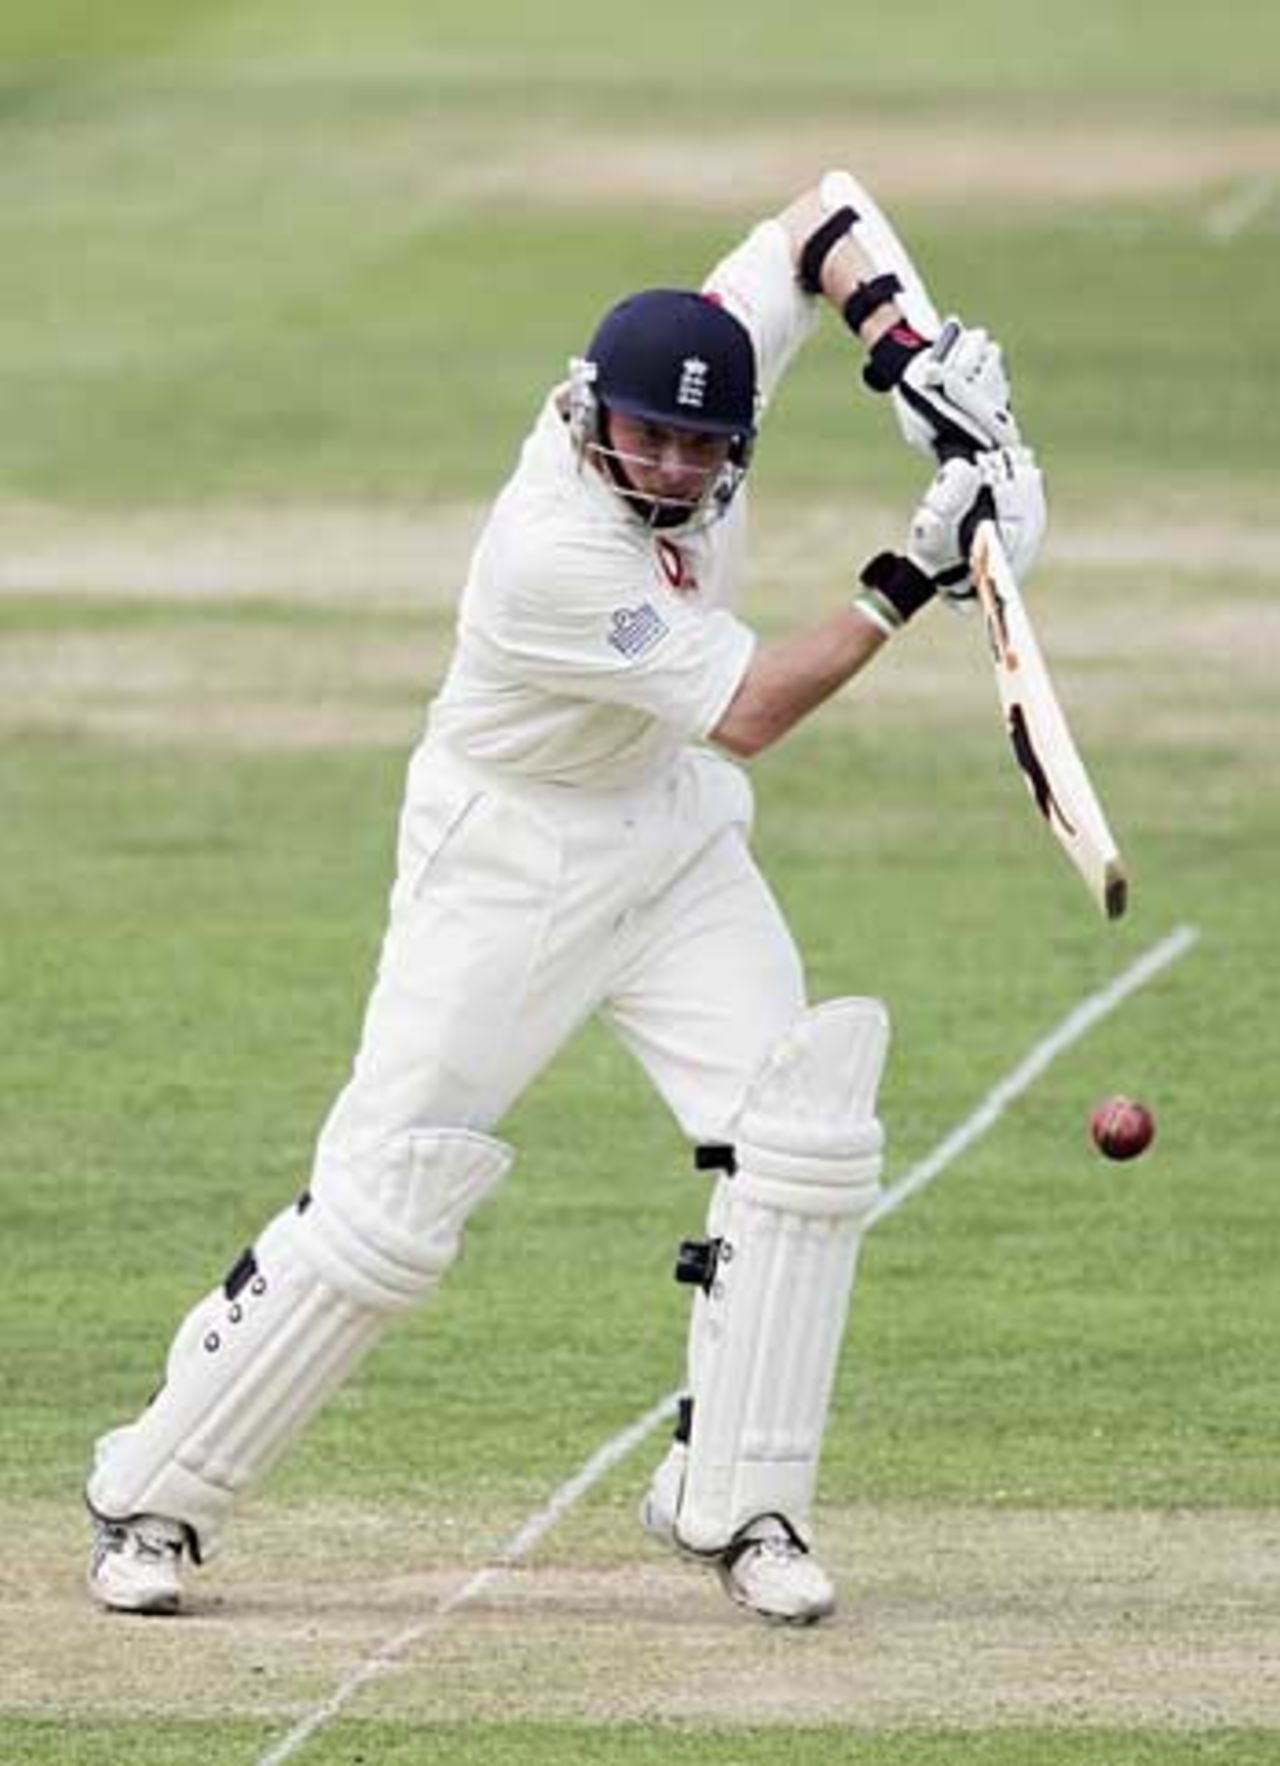 Ian Bell forces through the covers during his unbeaten 65, England v Bangladesh, 1st Test, Lord's, May 27